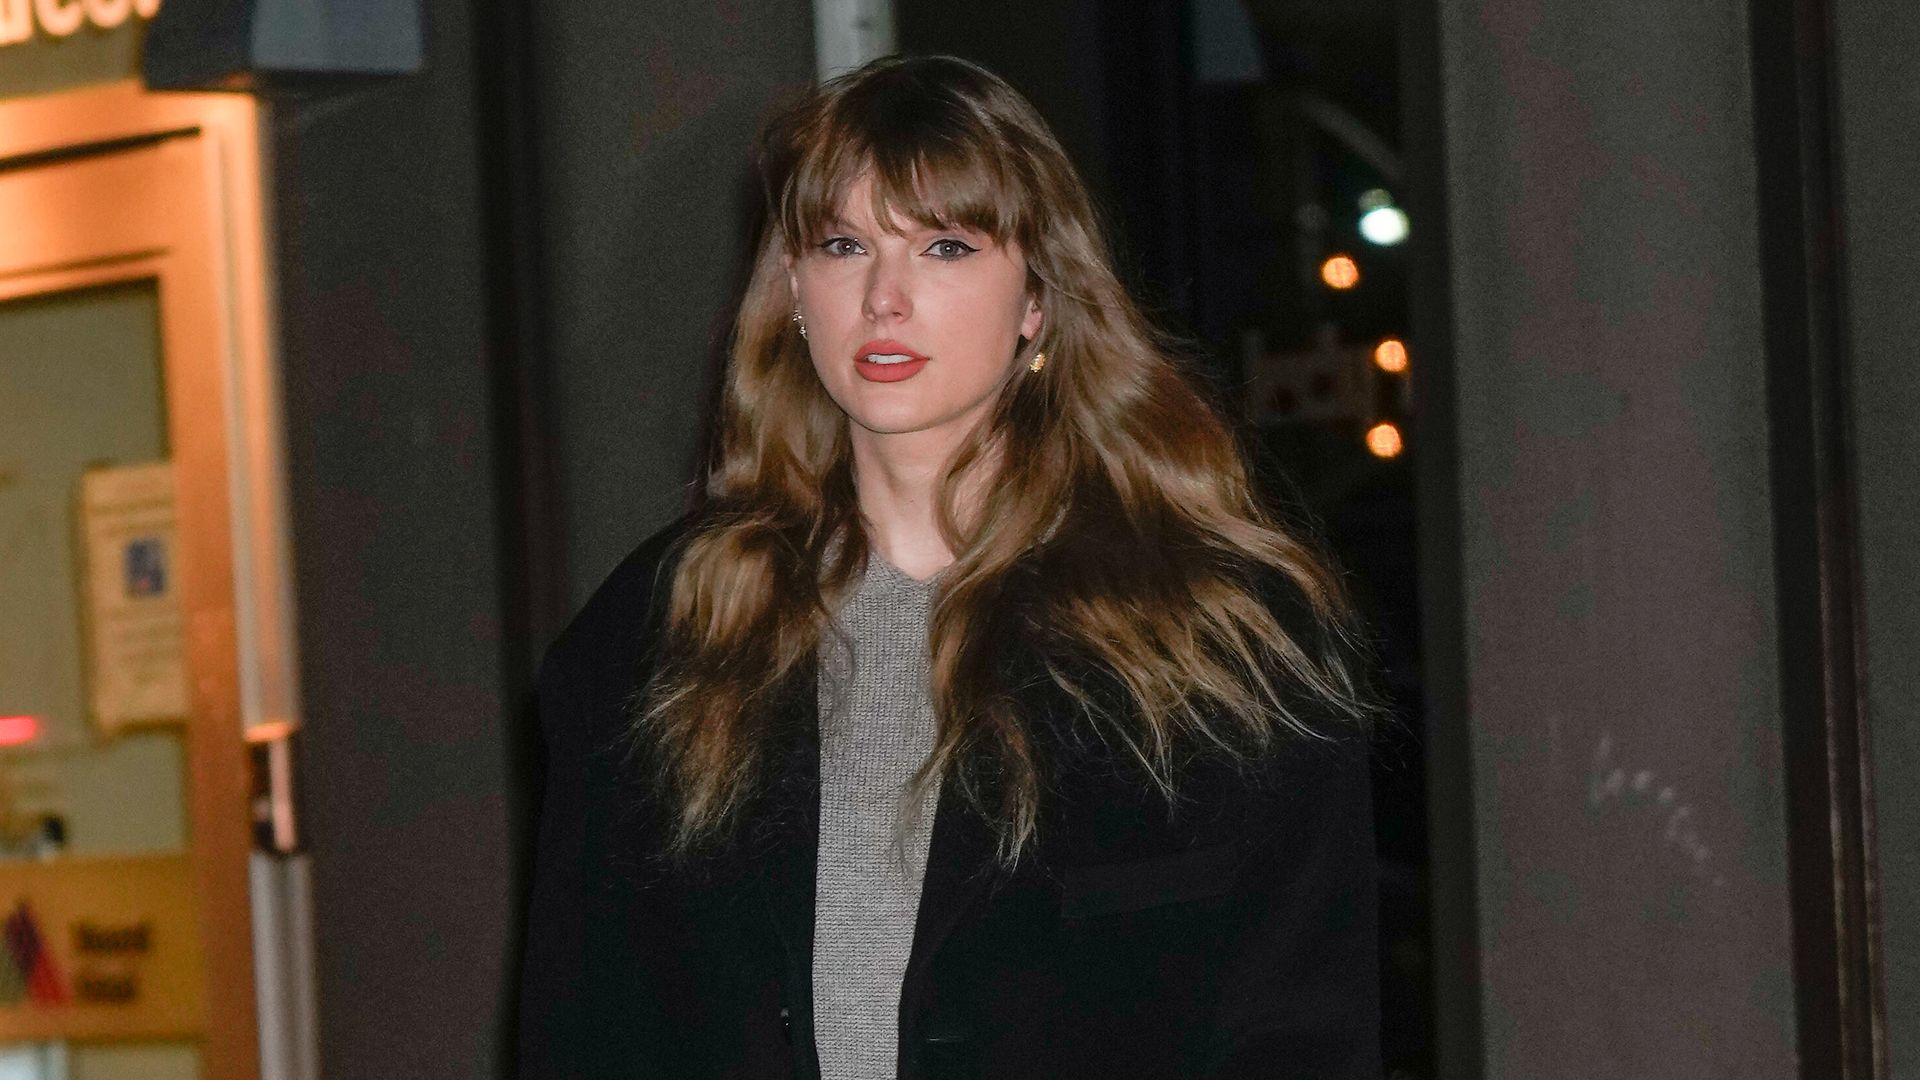 NEW YORK, NEW YORK - JANUARY 18: Taylor Swift is seen on January 18, 2024 in New York City. (Photo by Gotham/GC Images)